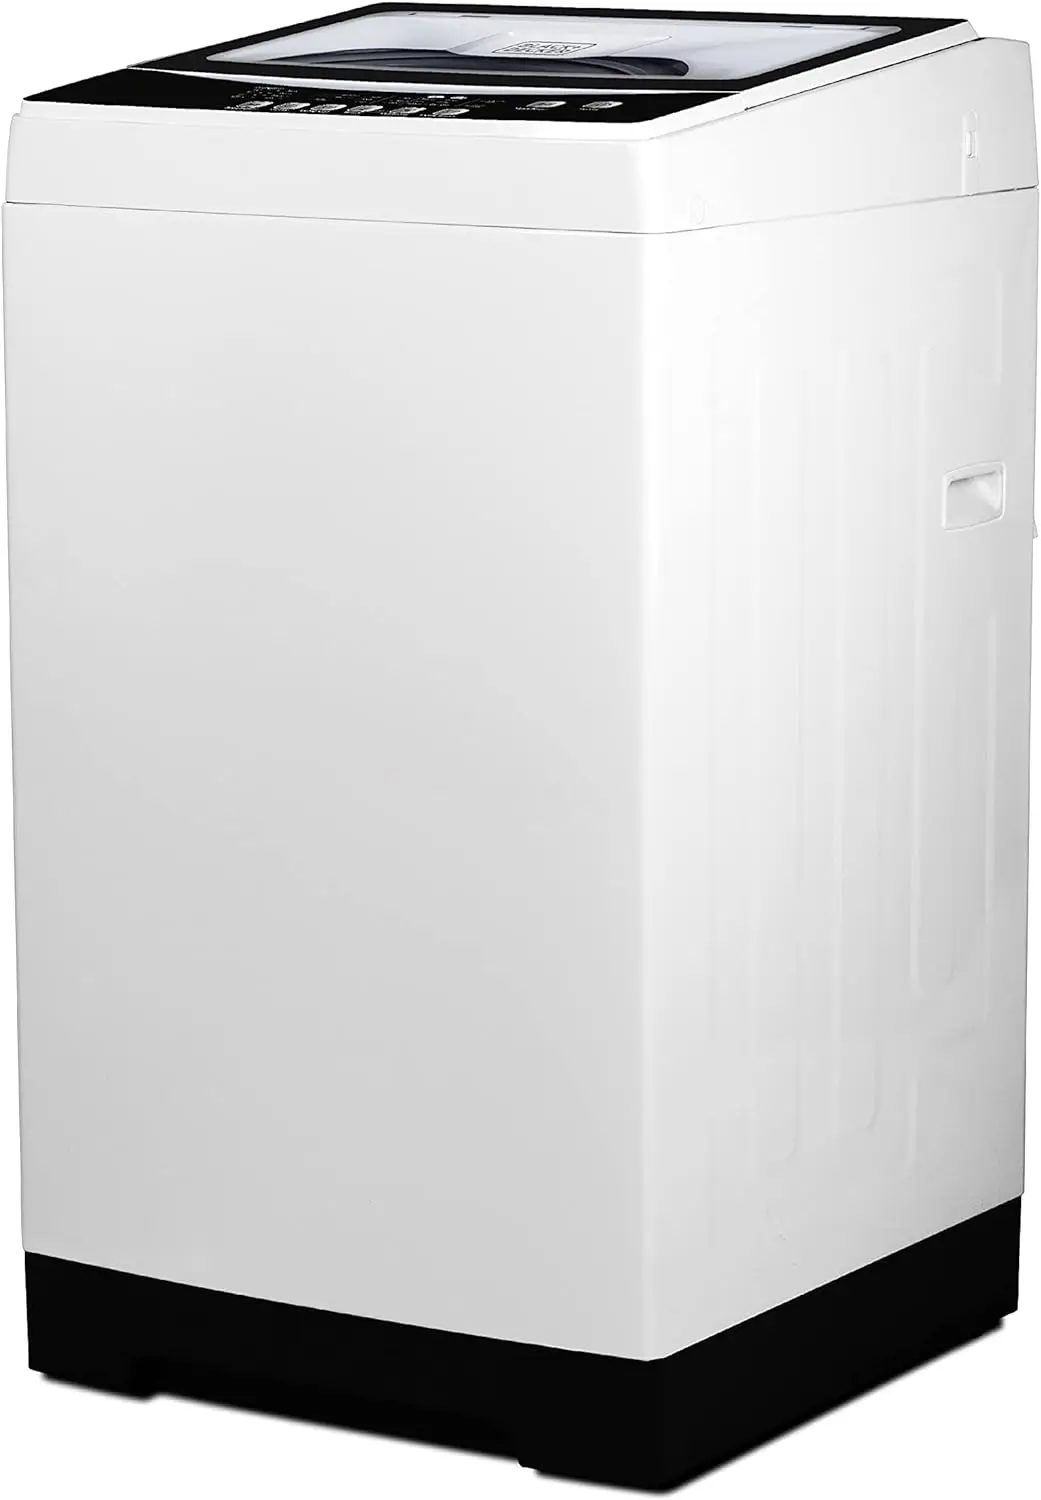 Mall portable washer washing machine for household use portable washer 3 0 cu ft with 6 thumb200